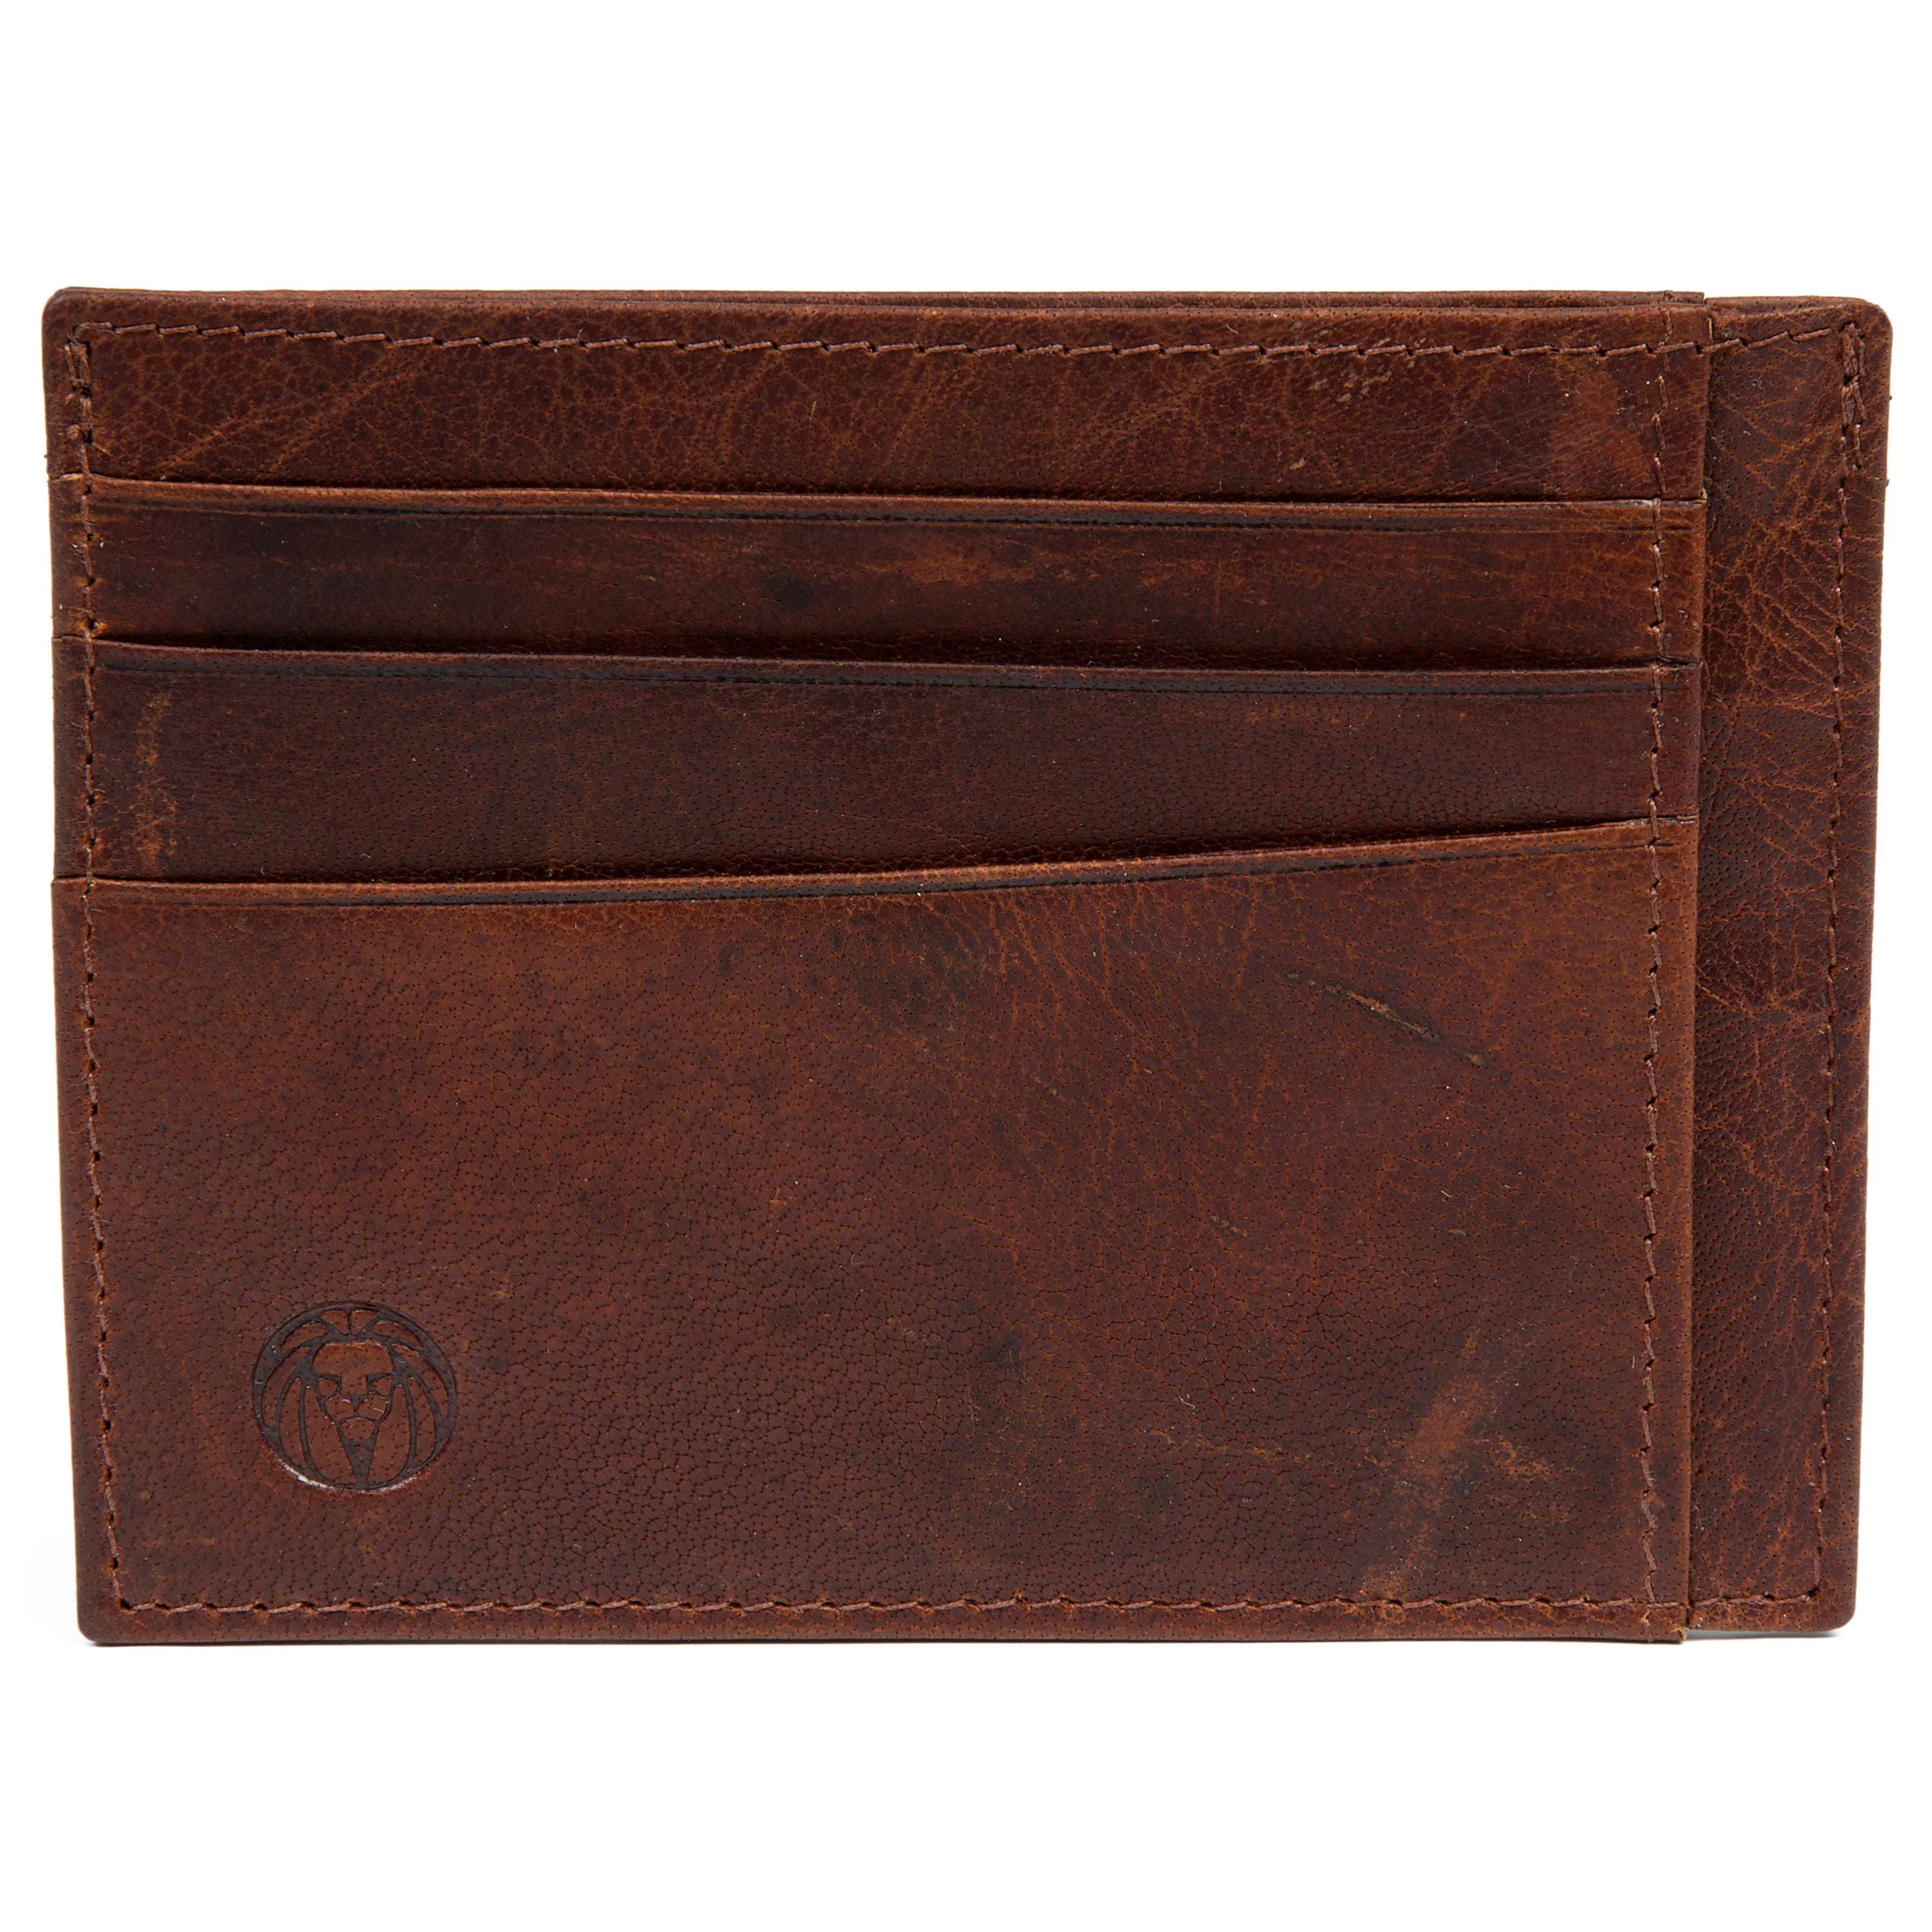 Montreal Tan RFID Leather Card Holder